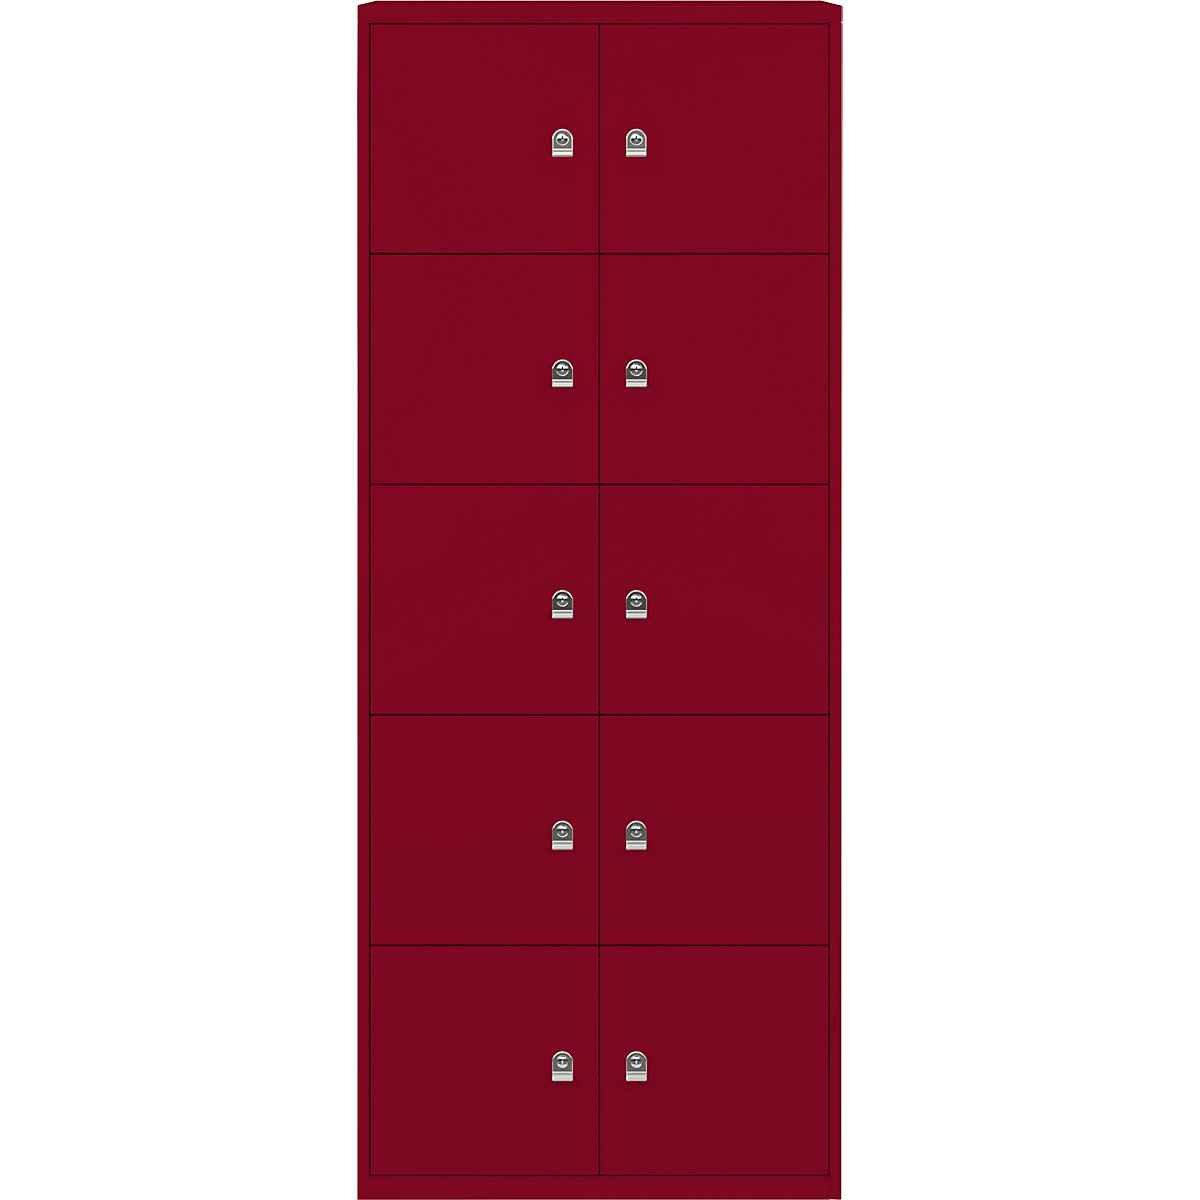 LateralFile™ lodge – BISLEY, with 10 lockable compartments, height 375 mm each, cardinal red-12